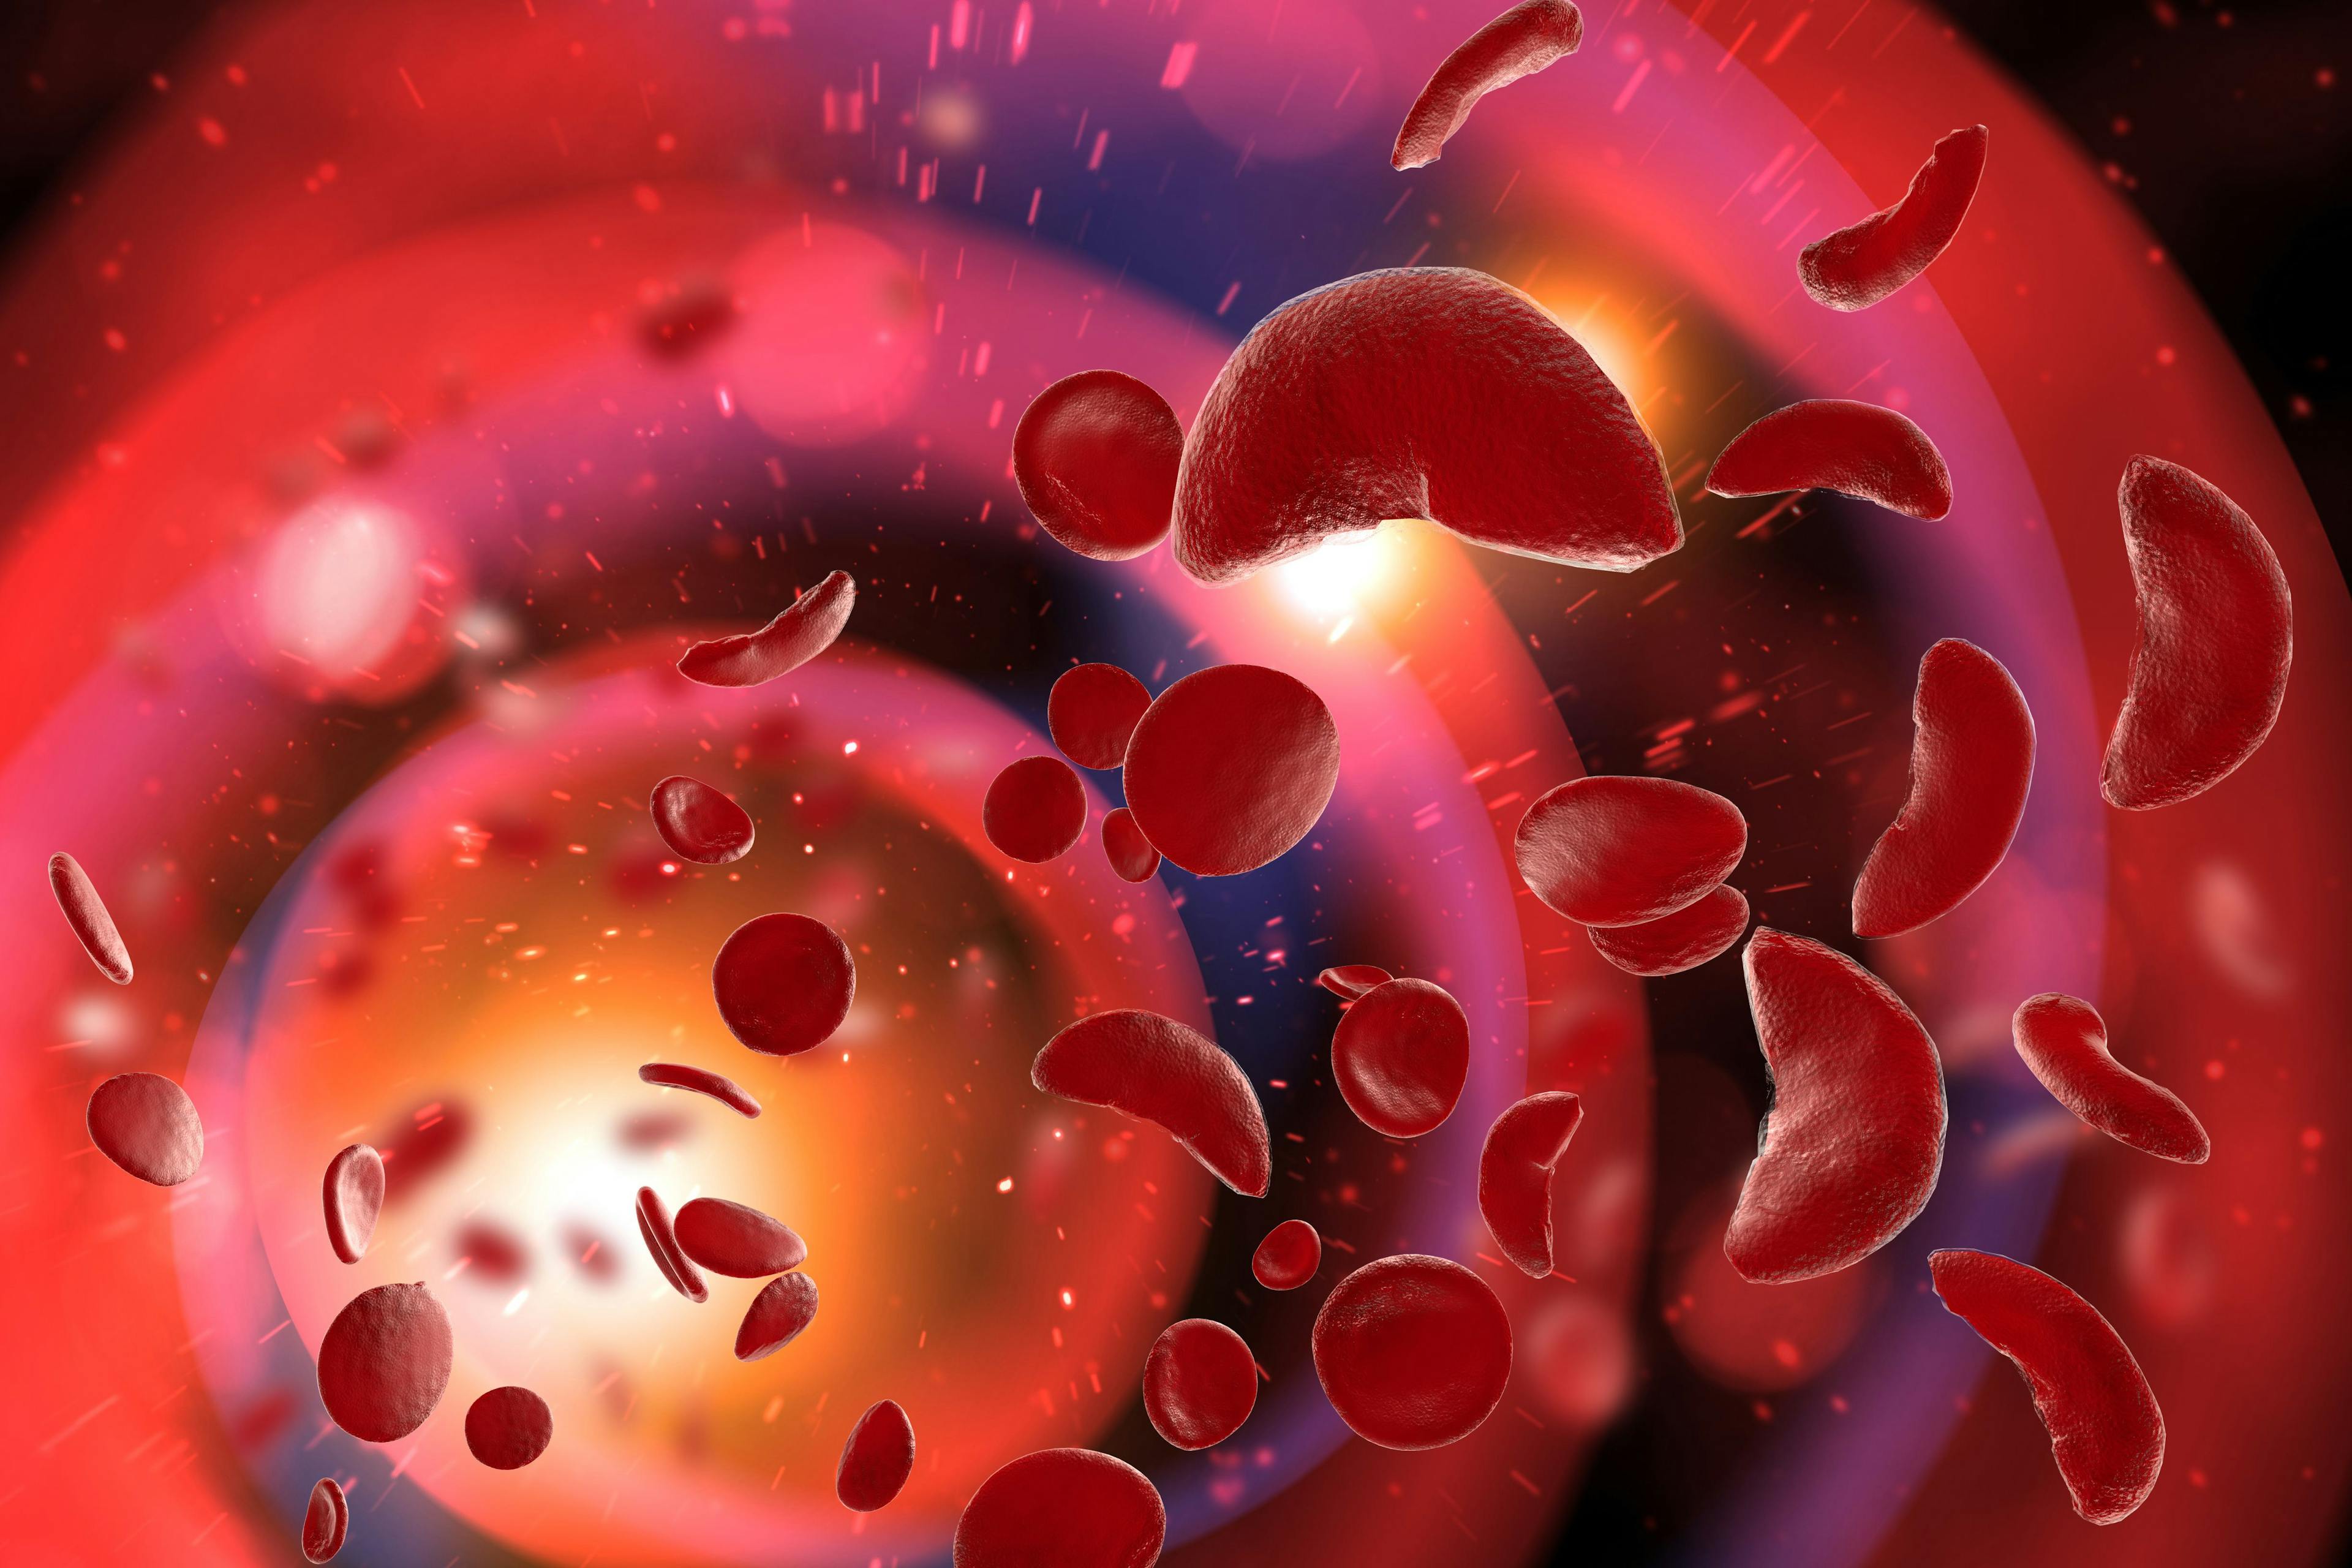 Sickle Cell Anemia 3D Illustration | Image Credit: © Ezume Images - stock.adobe.com